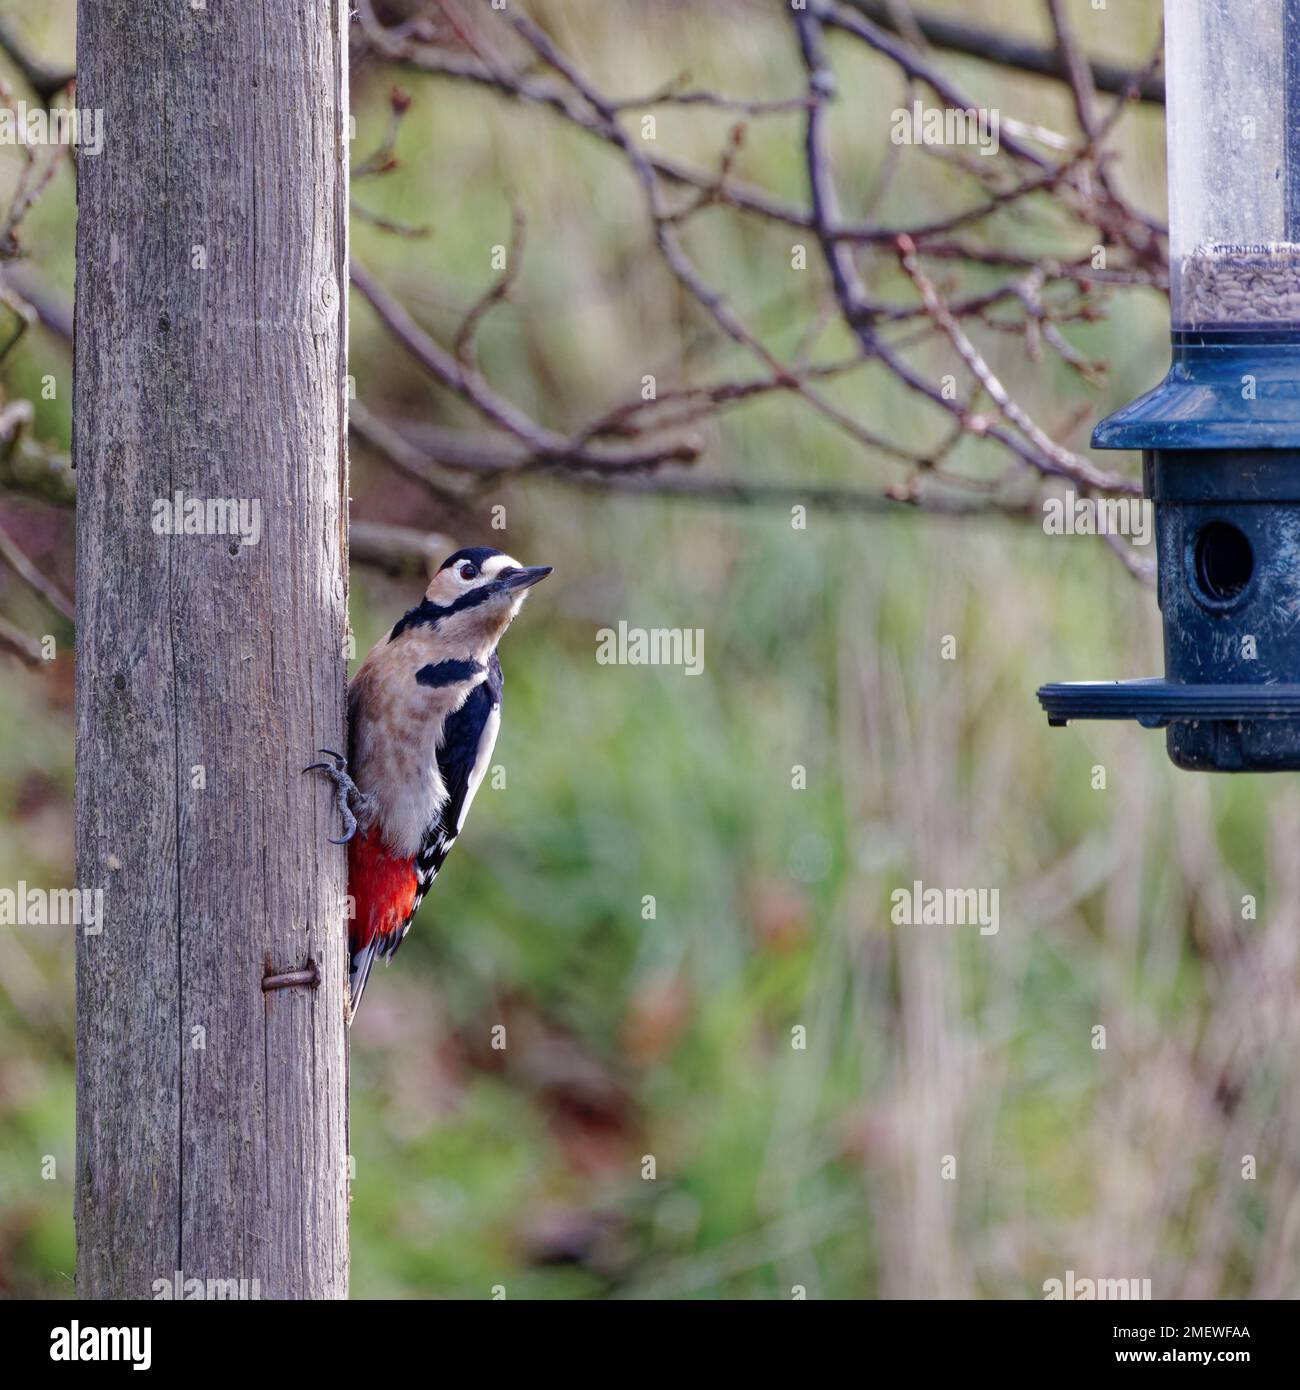 Male Greater Spotted Woodpecker (Dendrocopos major) viewing a feeder from his perch Stock Photo